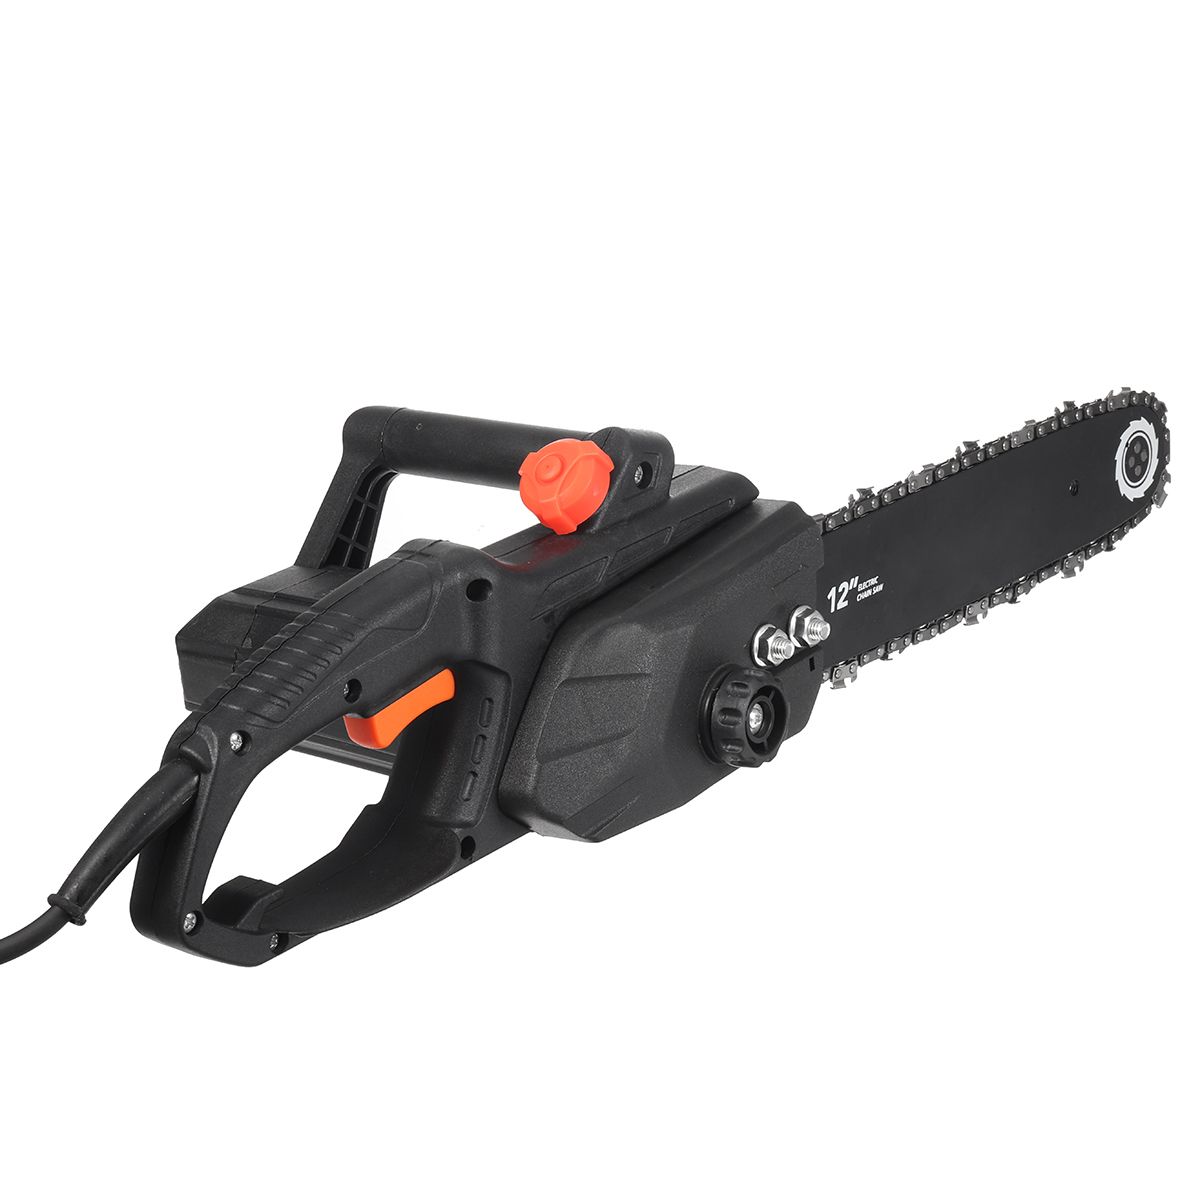 2000W-12-Inch-Electric-Chain-Saw-Corded-Chainsaw-Garden-Cutting-Tool-Woodworking-1758752